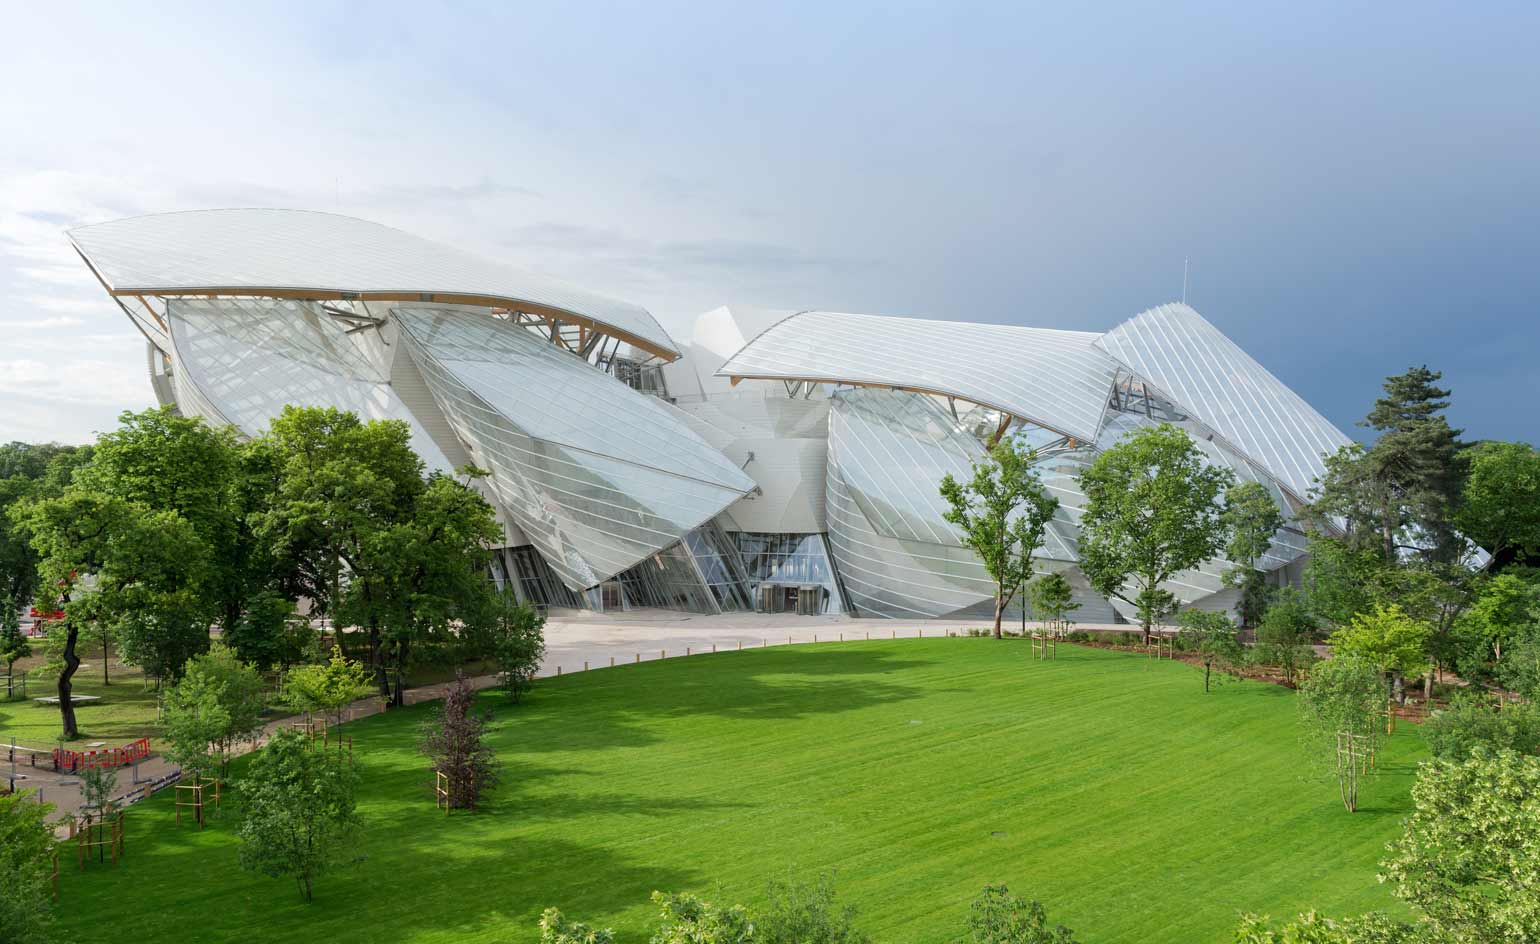 KEYS TO A PASSION AT FONDATION LOUIS VUITTON - News